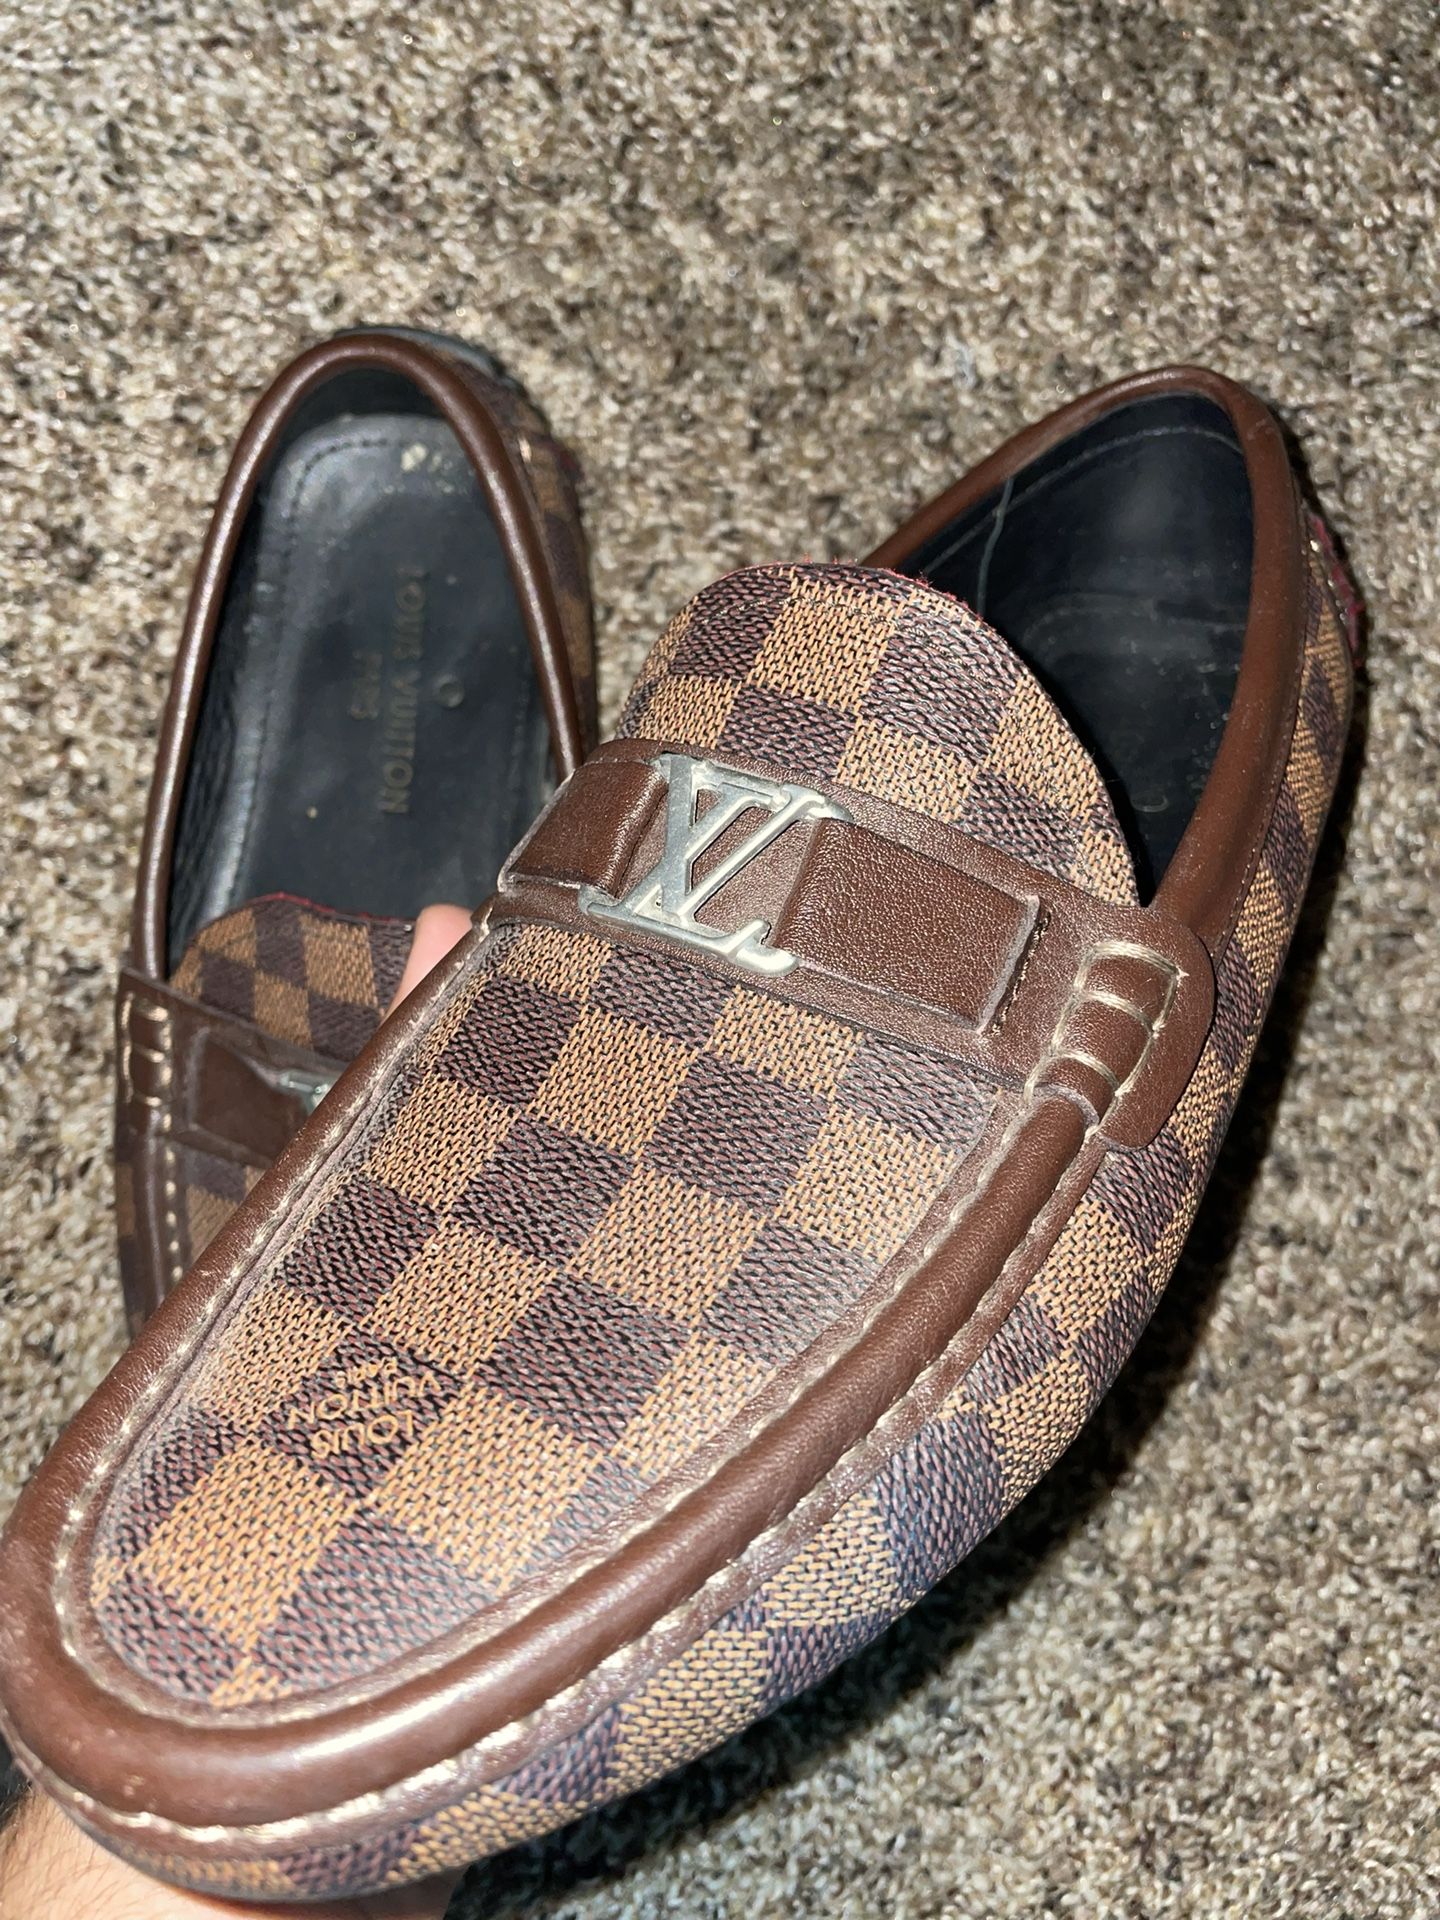 LV Loafers Men's Size 8-9 EU 40 for Sale in Garfield Heights, OH - OfferUp